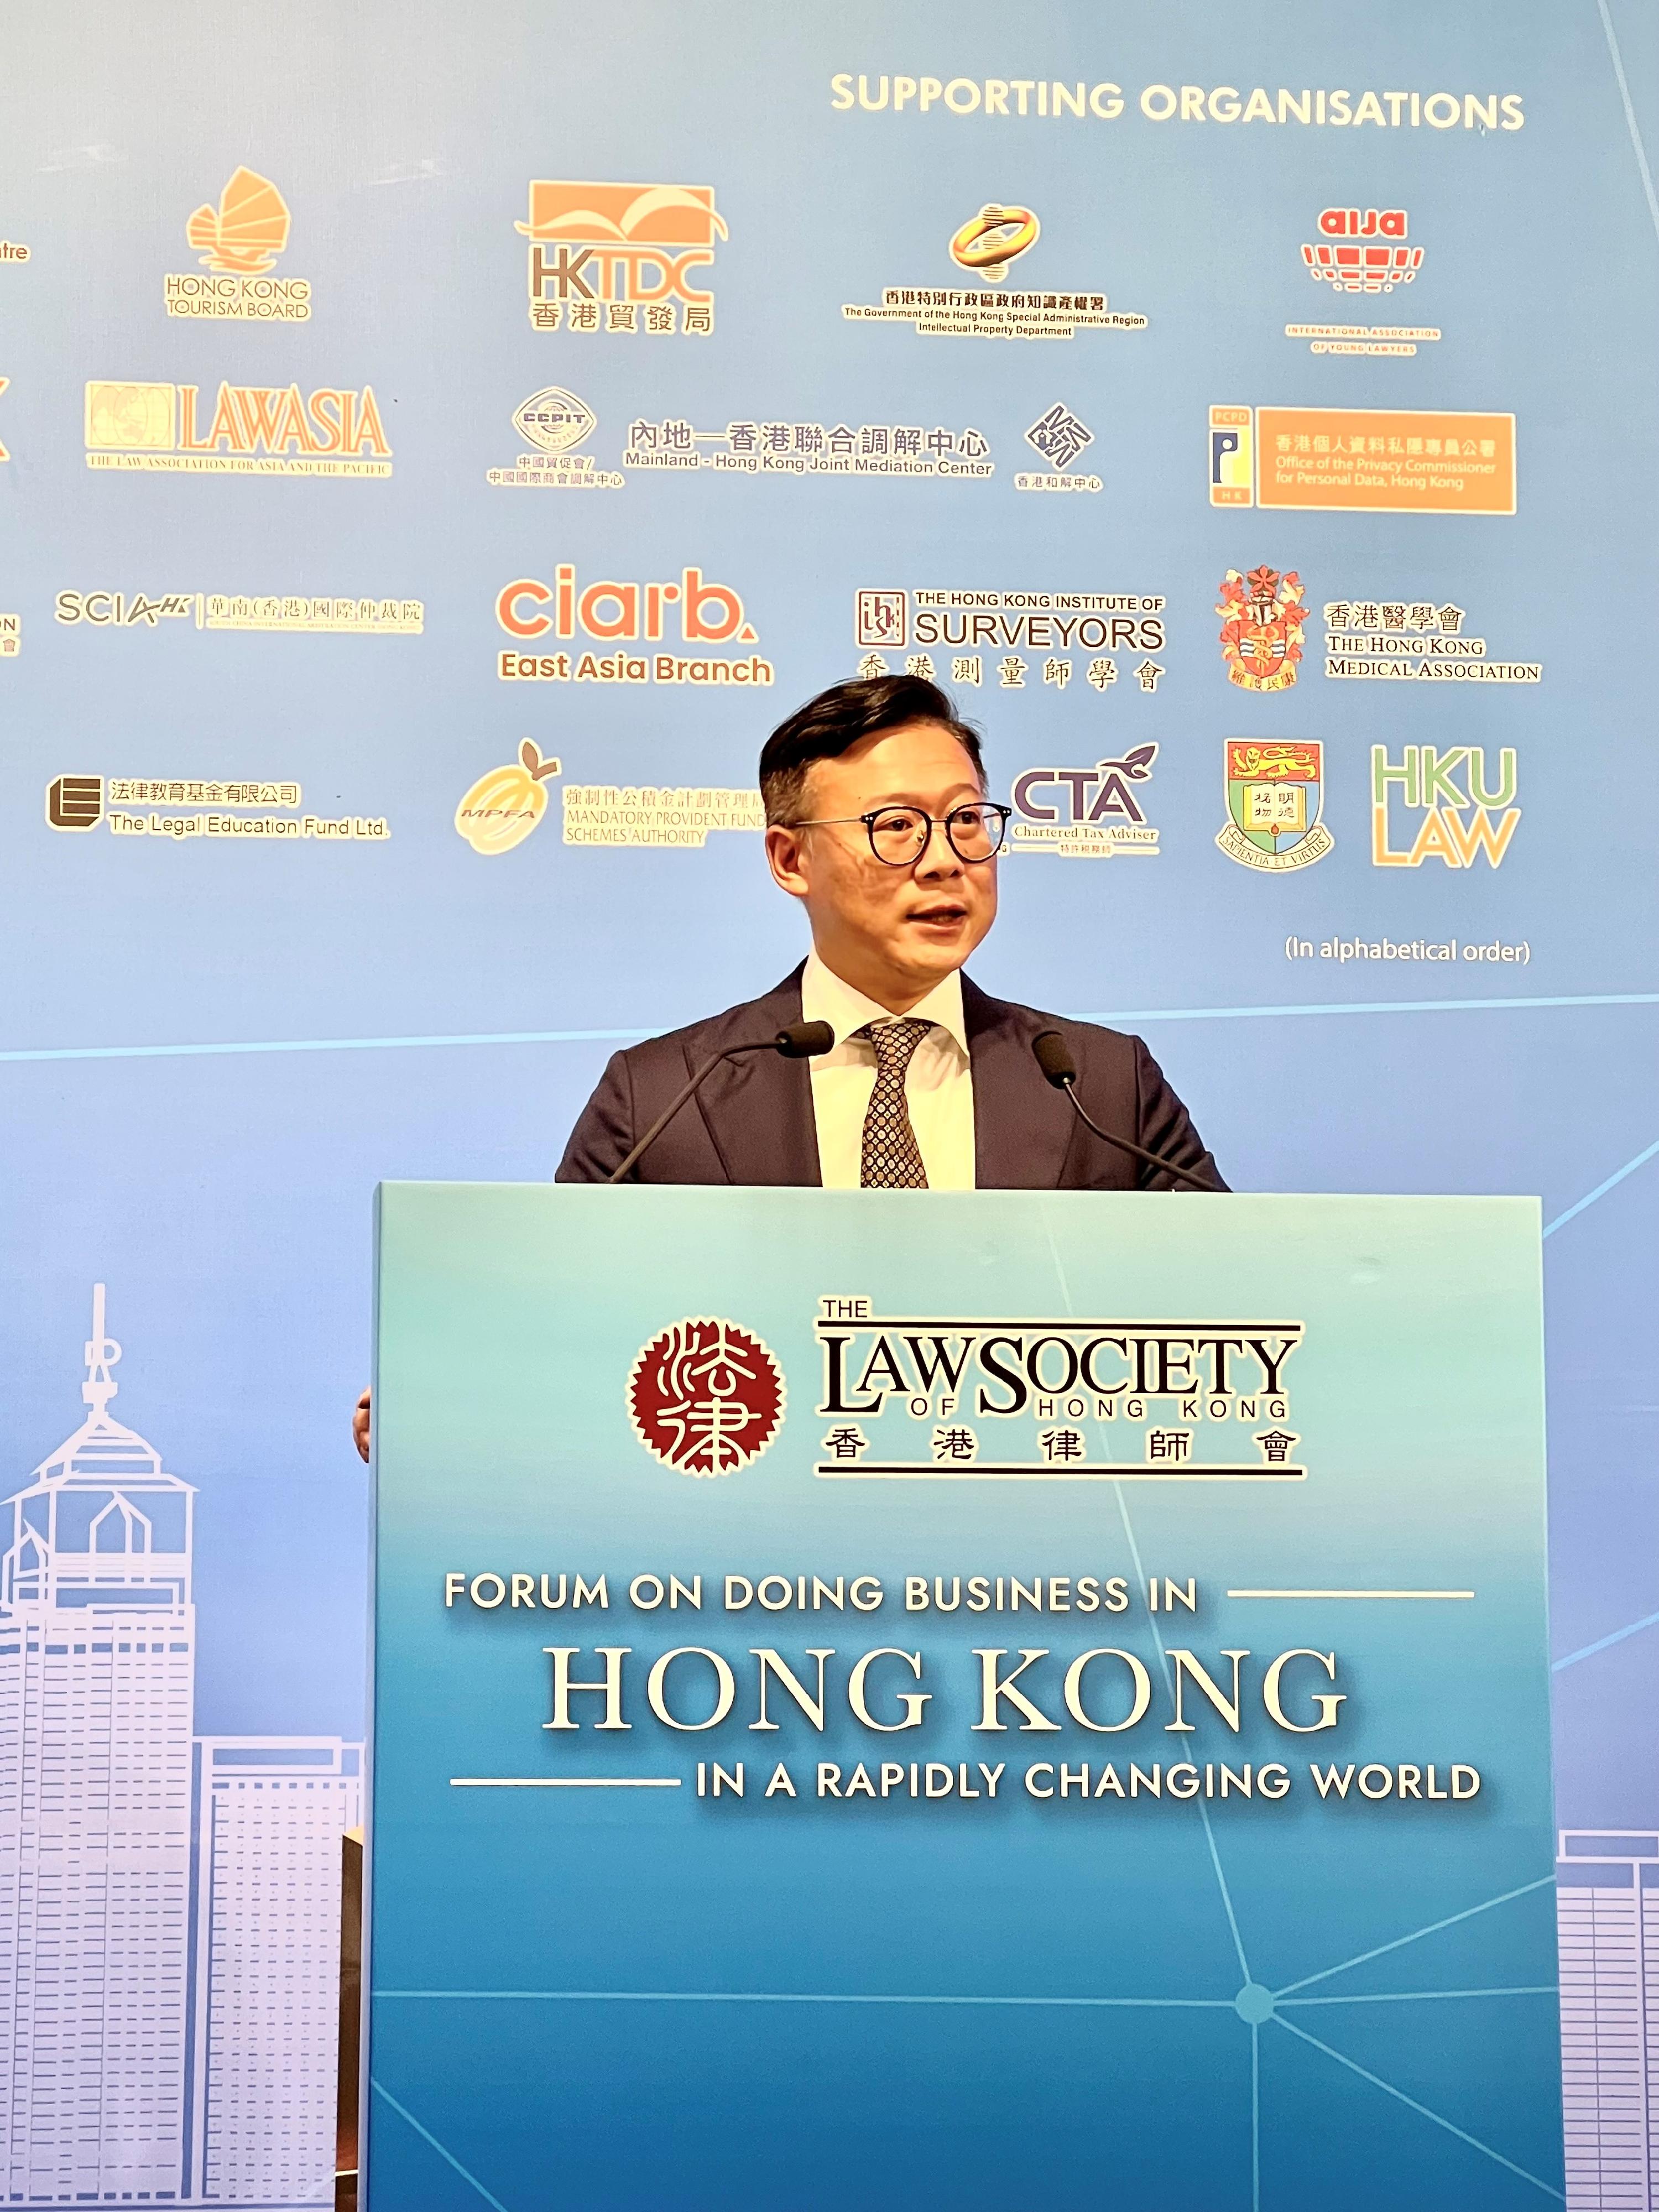 The Deputy Secretary for Justice, Mr Cheung Kwok-kwan, speaks at the Law Society of Hong Kong's Forum on Doing Business in Hong Kong in a Rapidly Changing World today (July 11).

